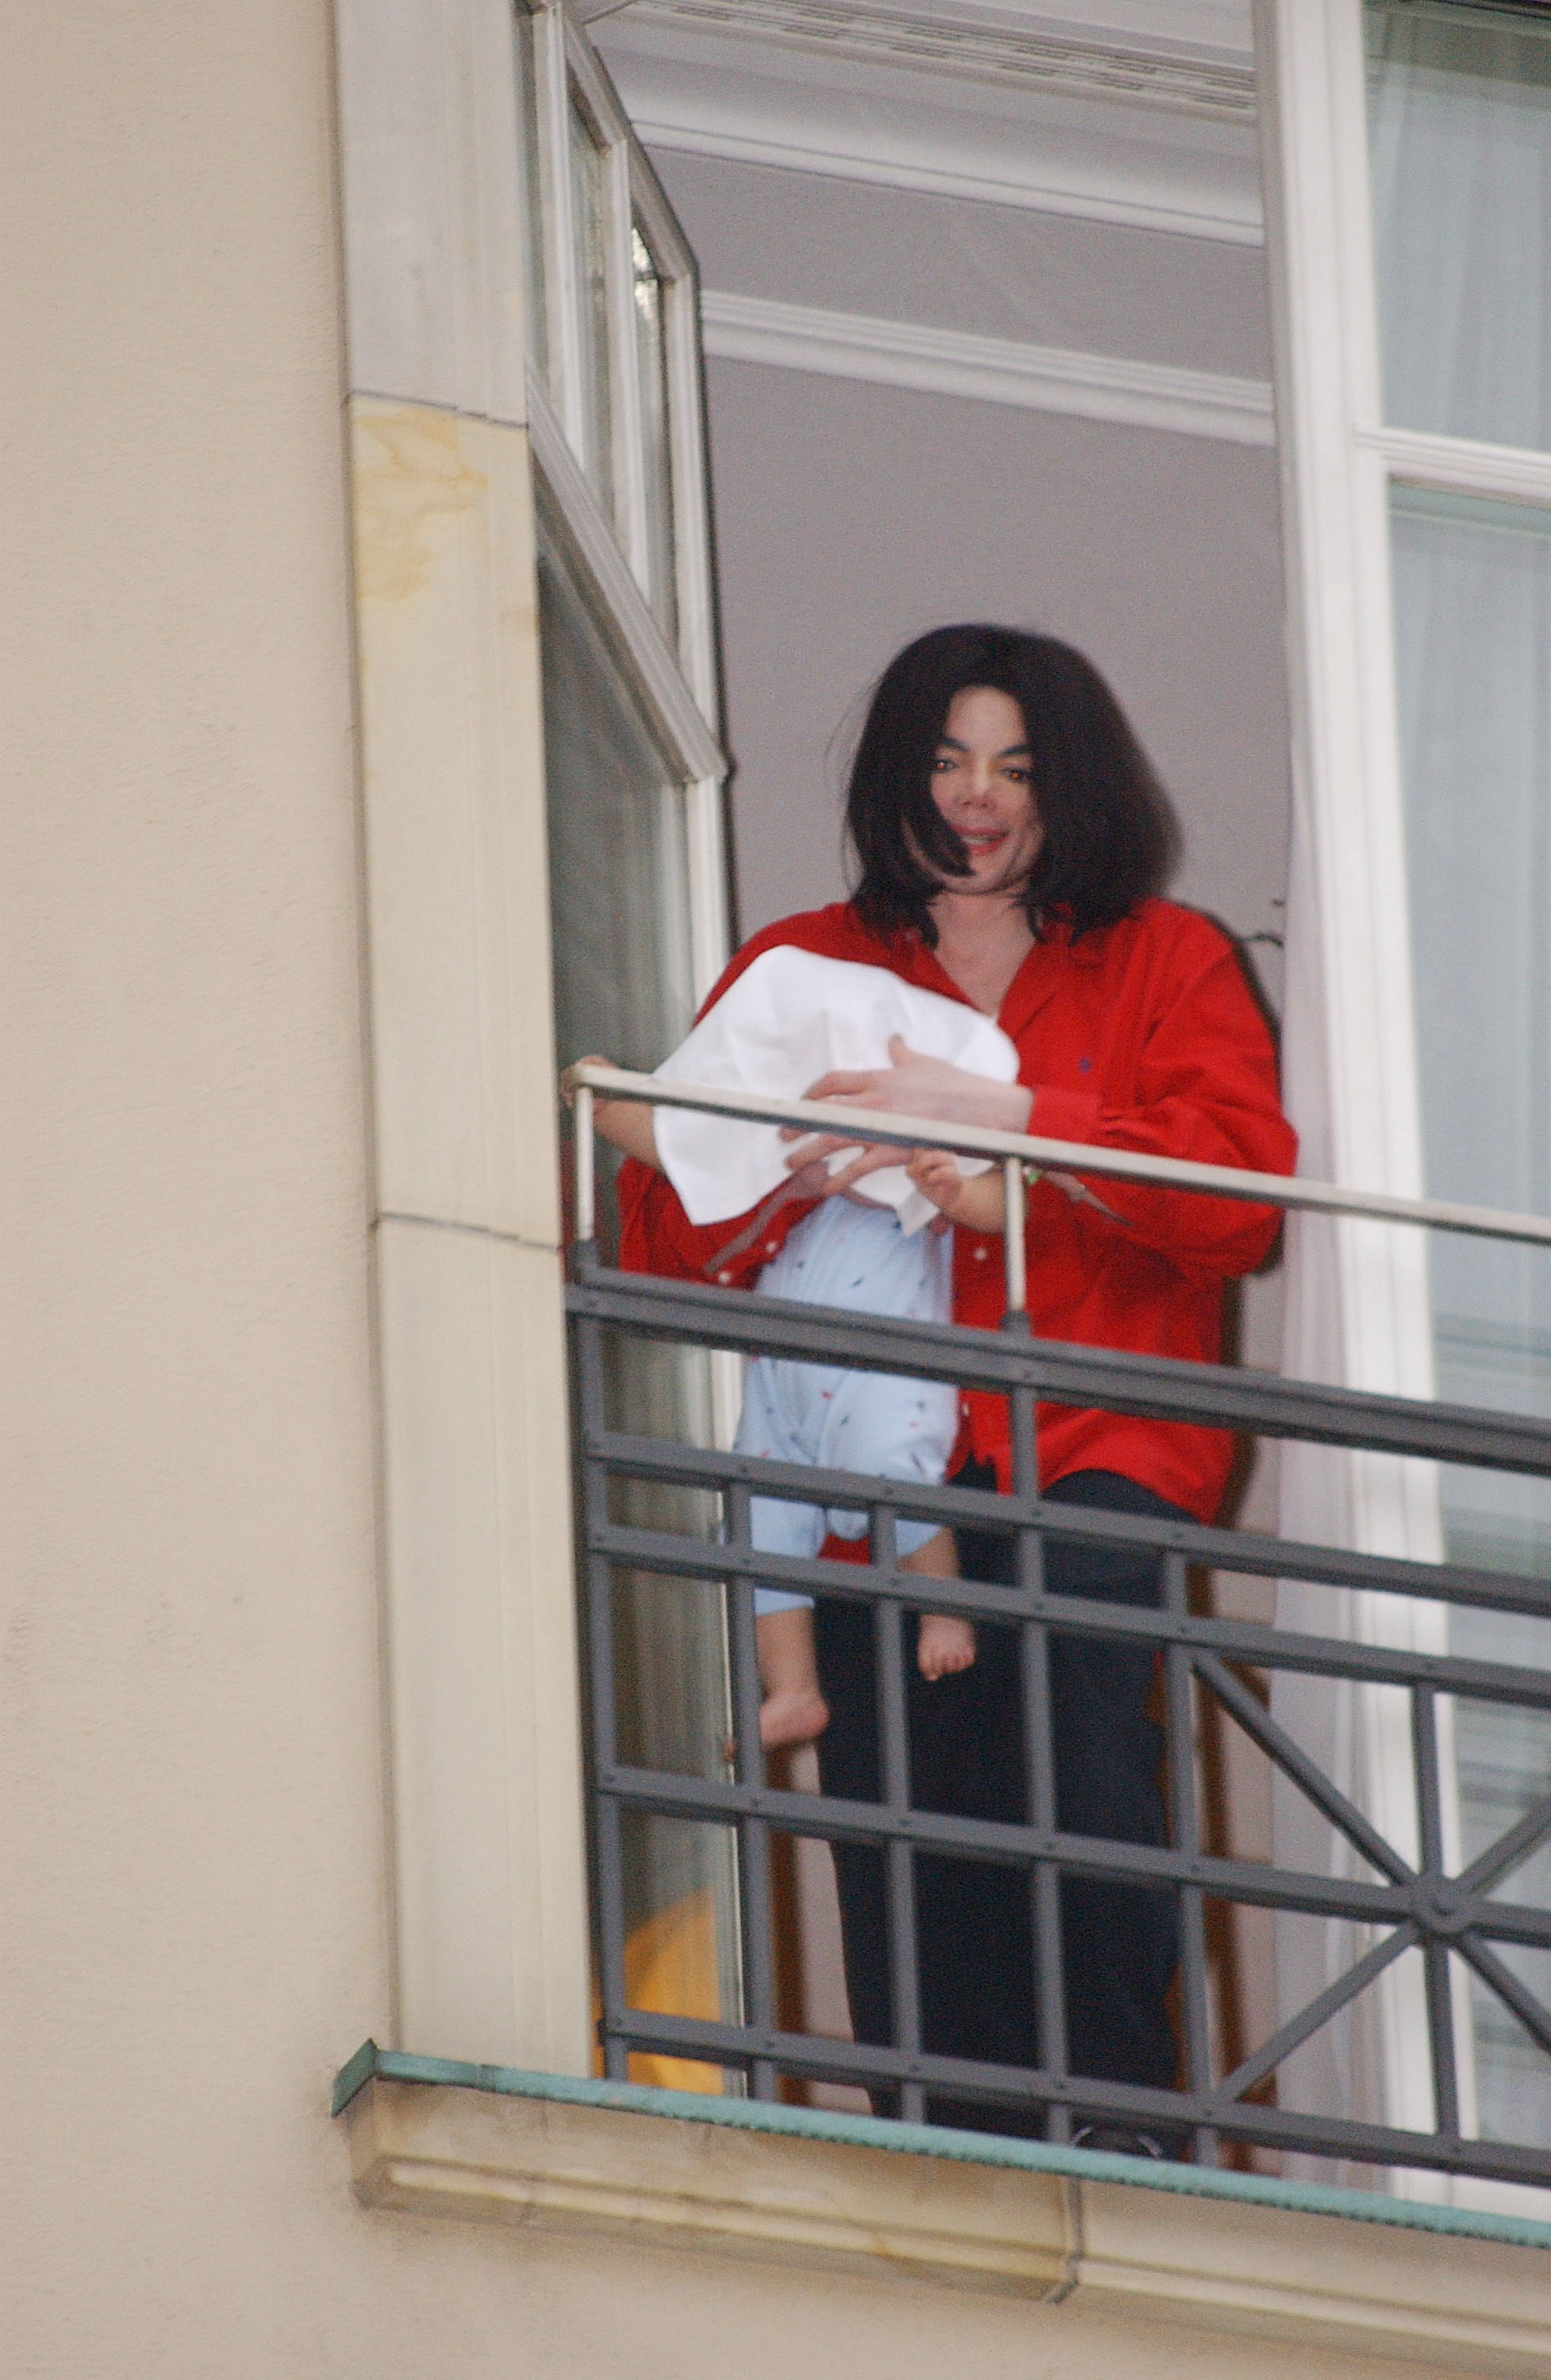 Michael Jackson holds his months-old son, Prince Michael II, on the balcony of the Adlon Hotel on November 19, 2002, in Berlin, Germany | Source: Getty Images